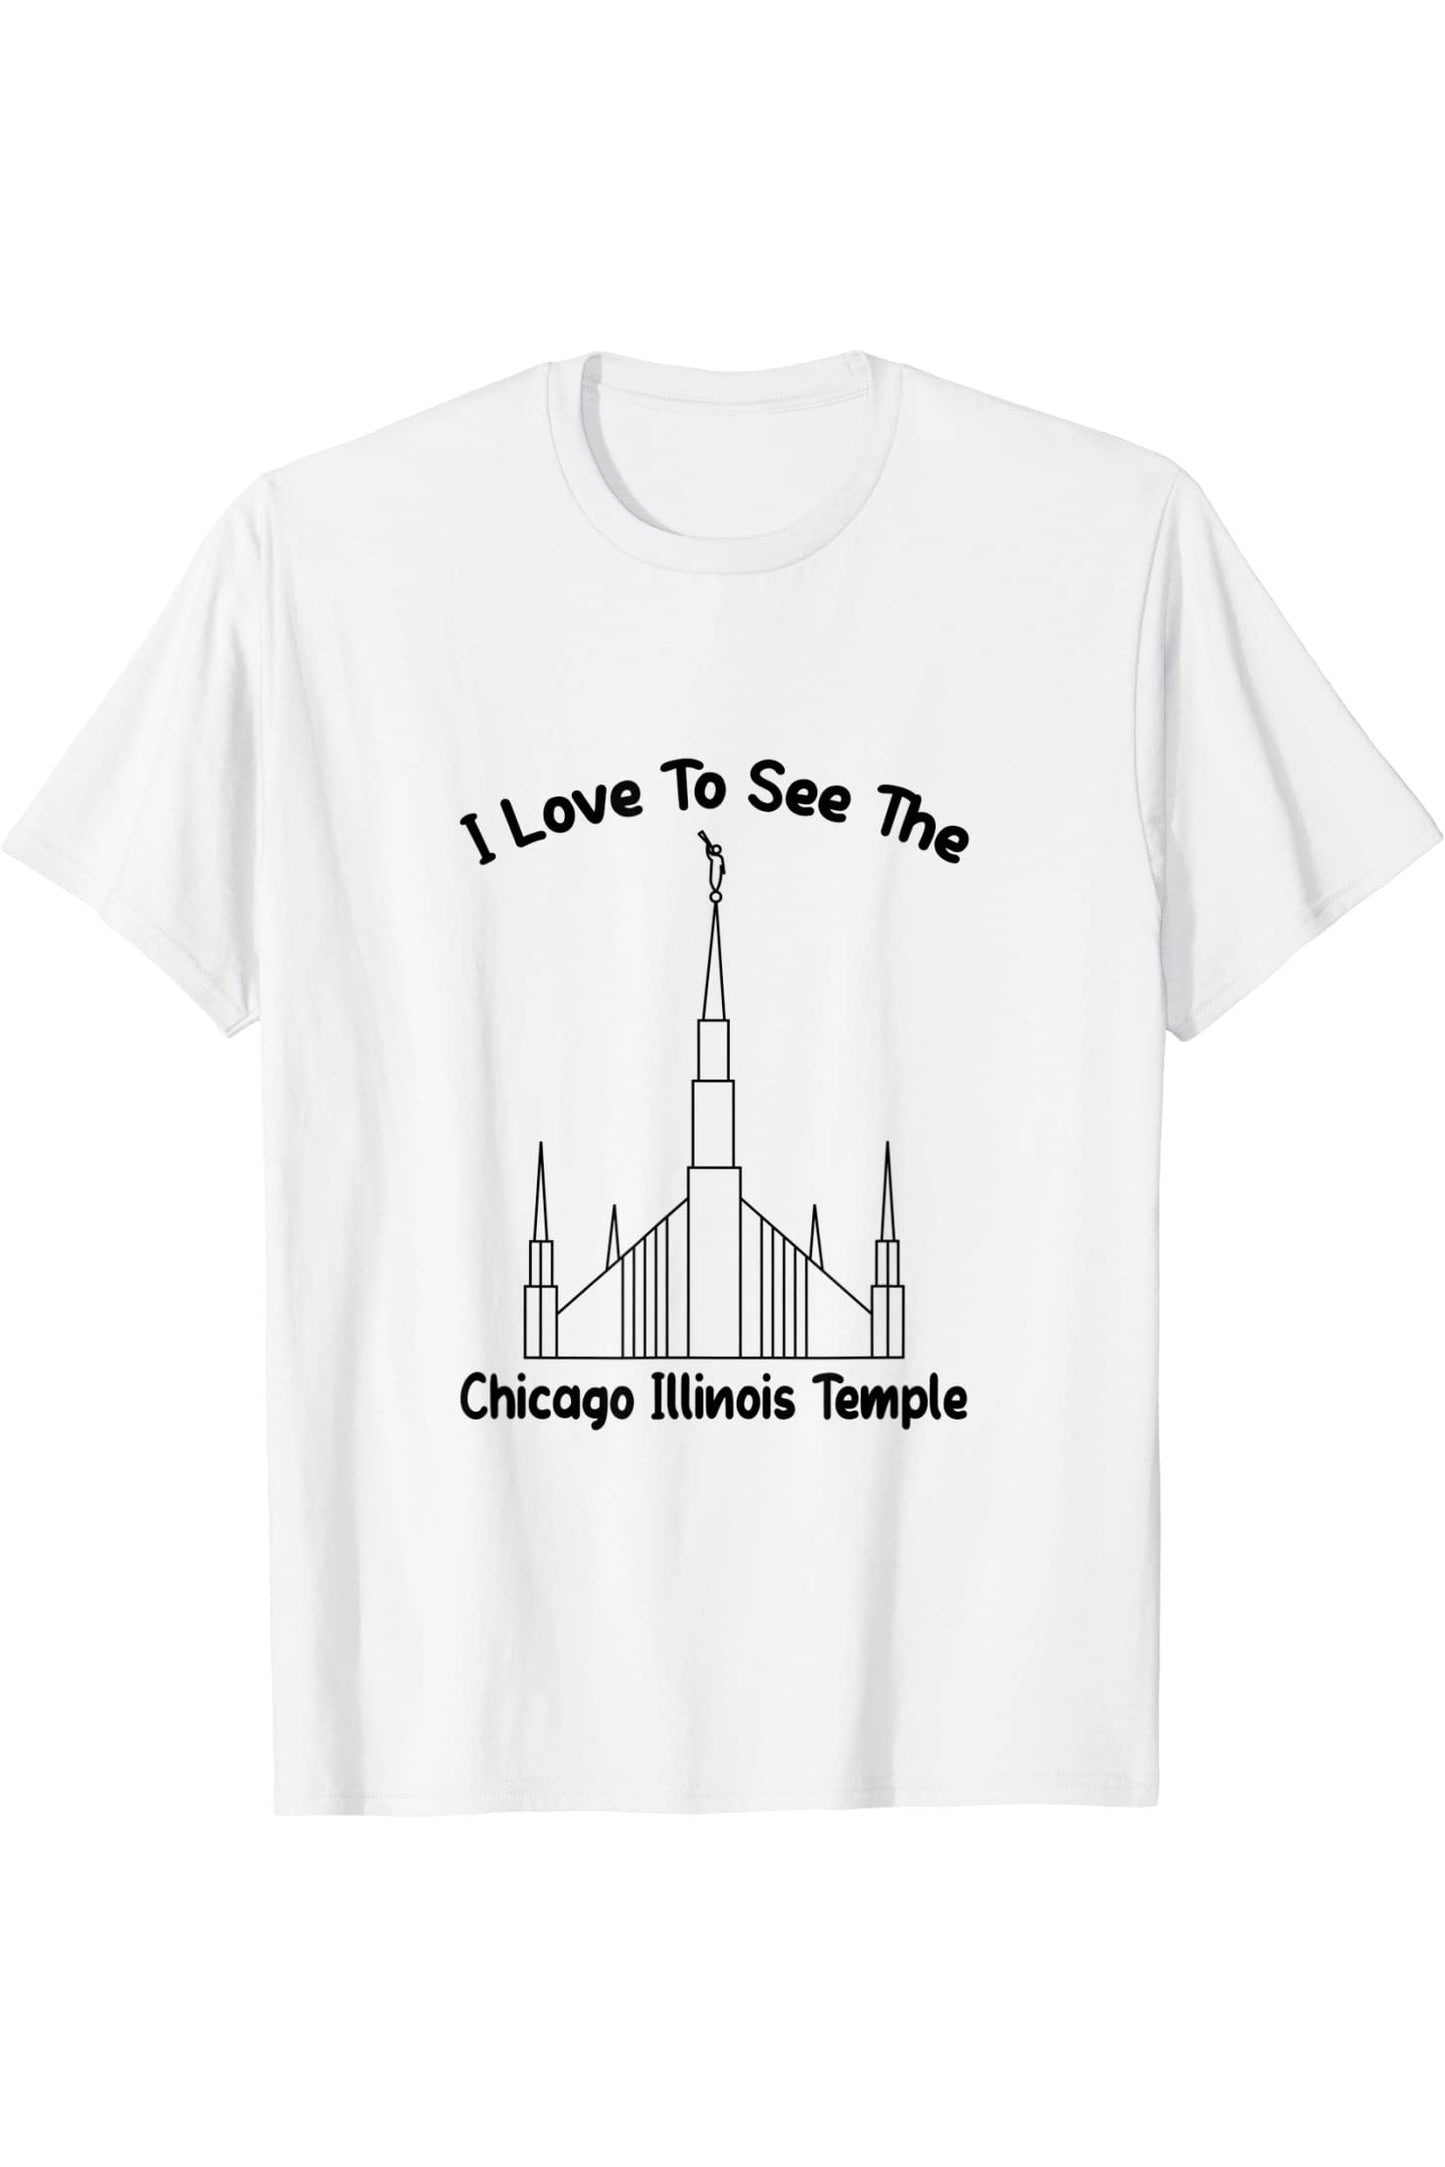 Chicago Illinois Temple T-Shirt - Primary Style (English) US